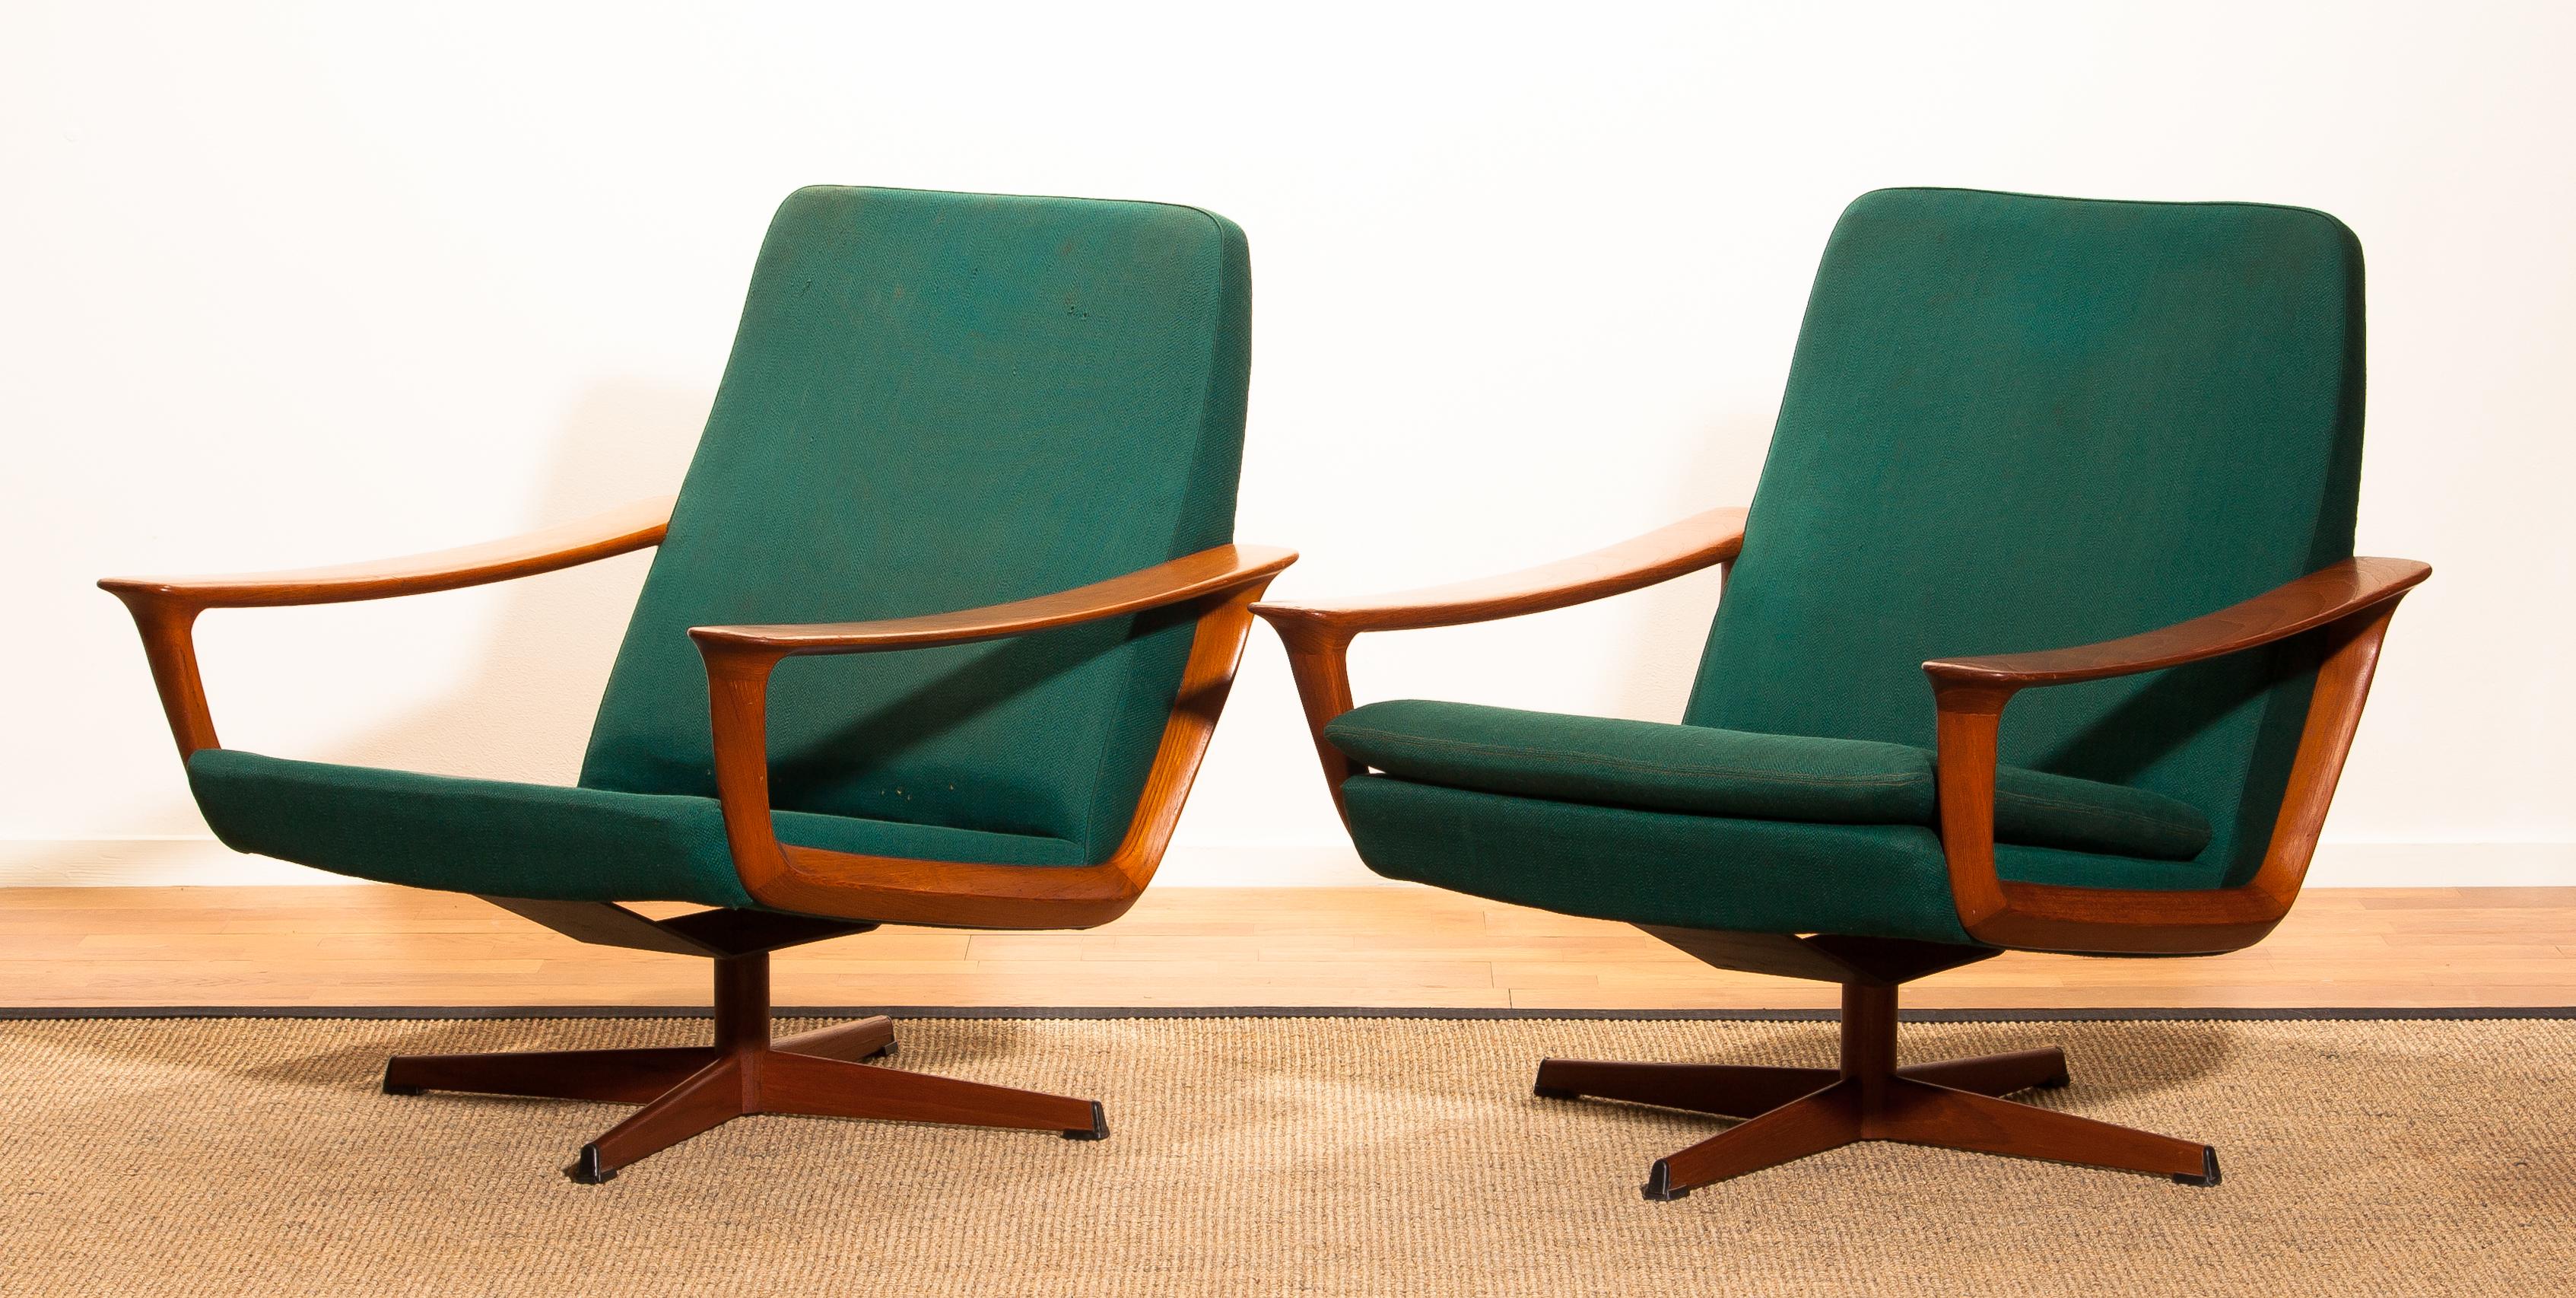 Metal 1960s, Teak Set of Two Swivel Chairs by Johannes Andersson for Trensum, Denmark